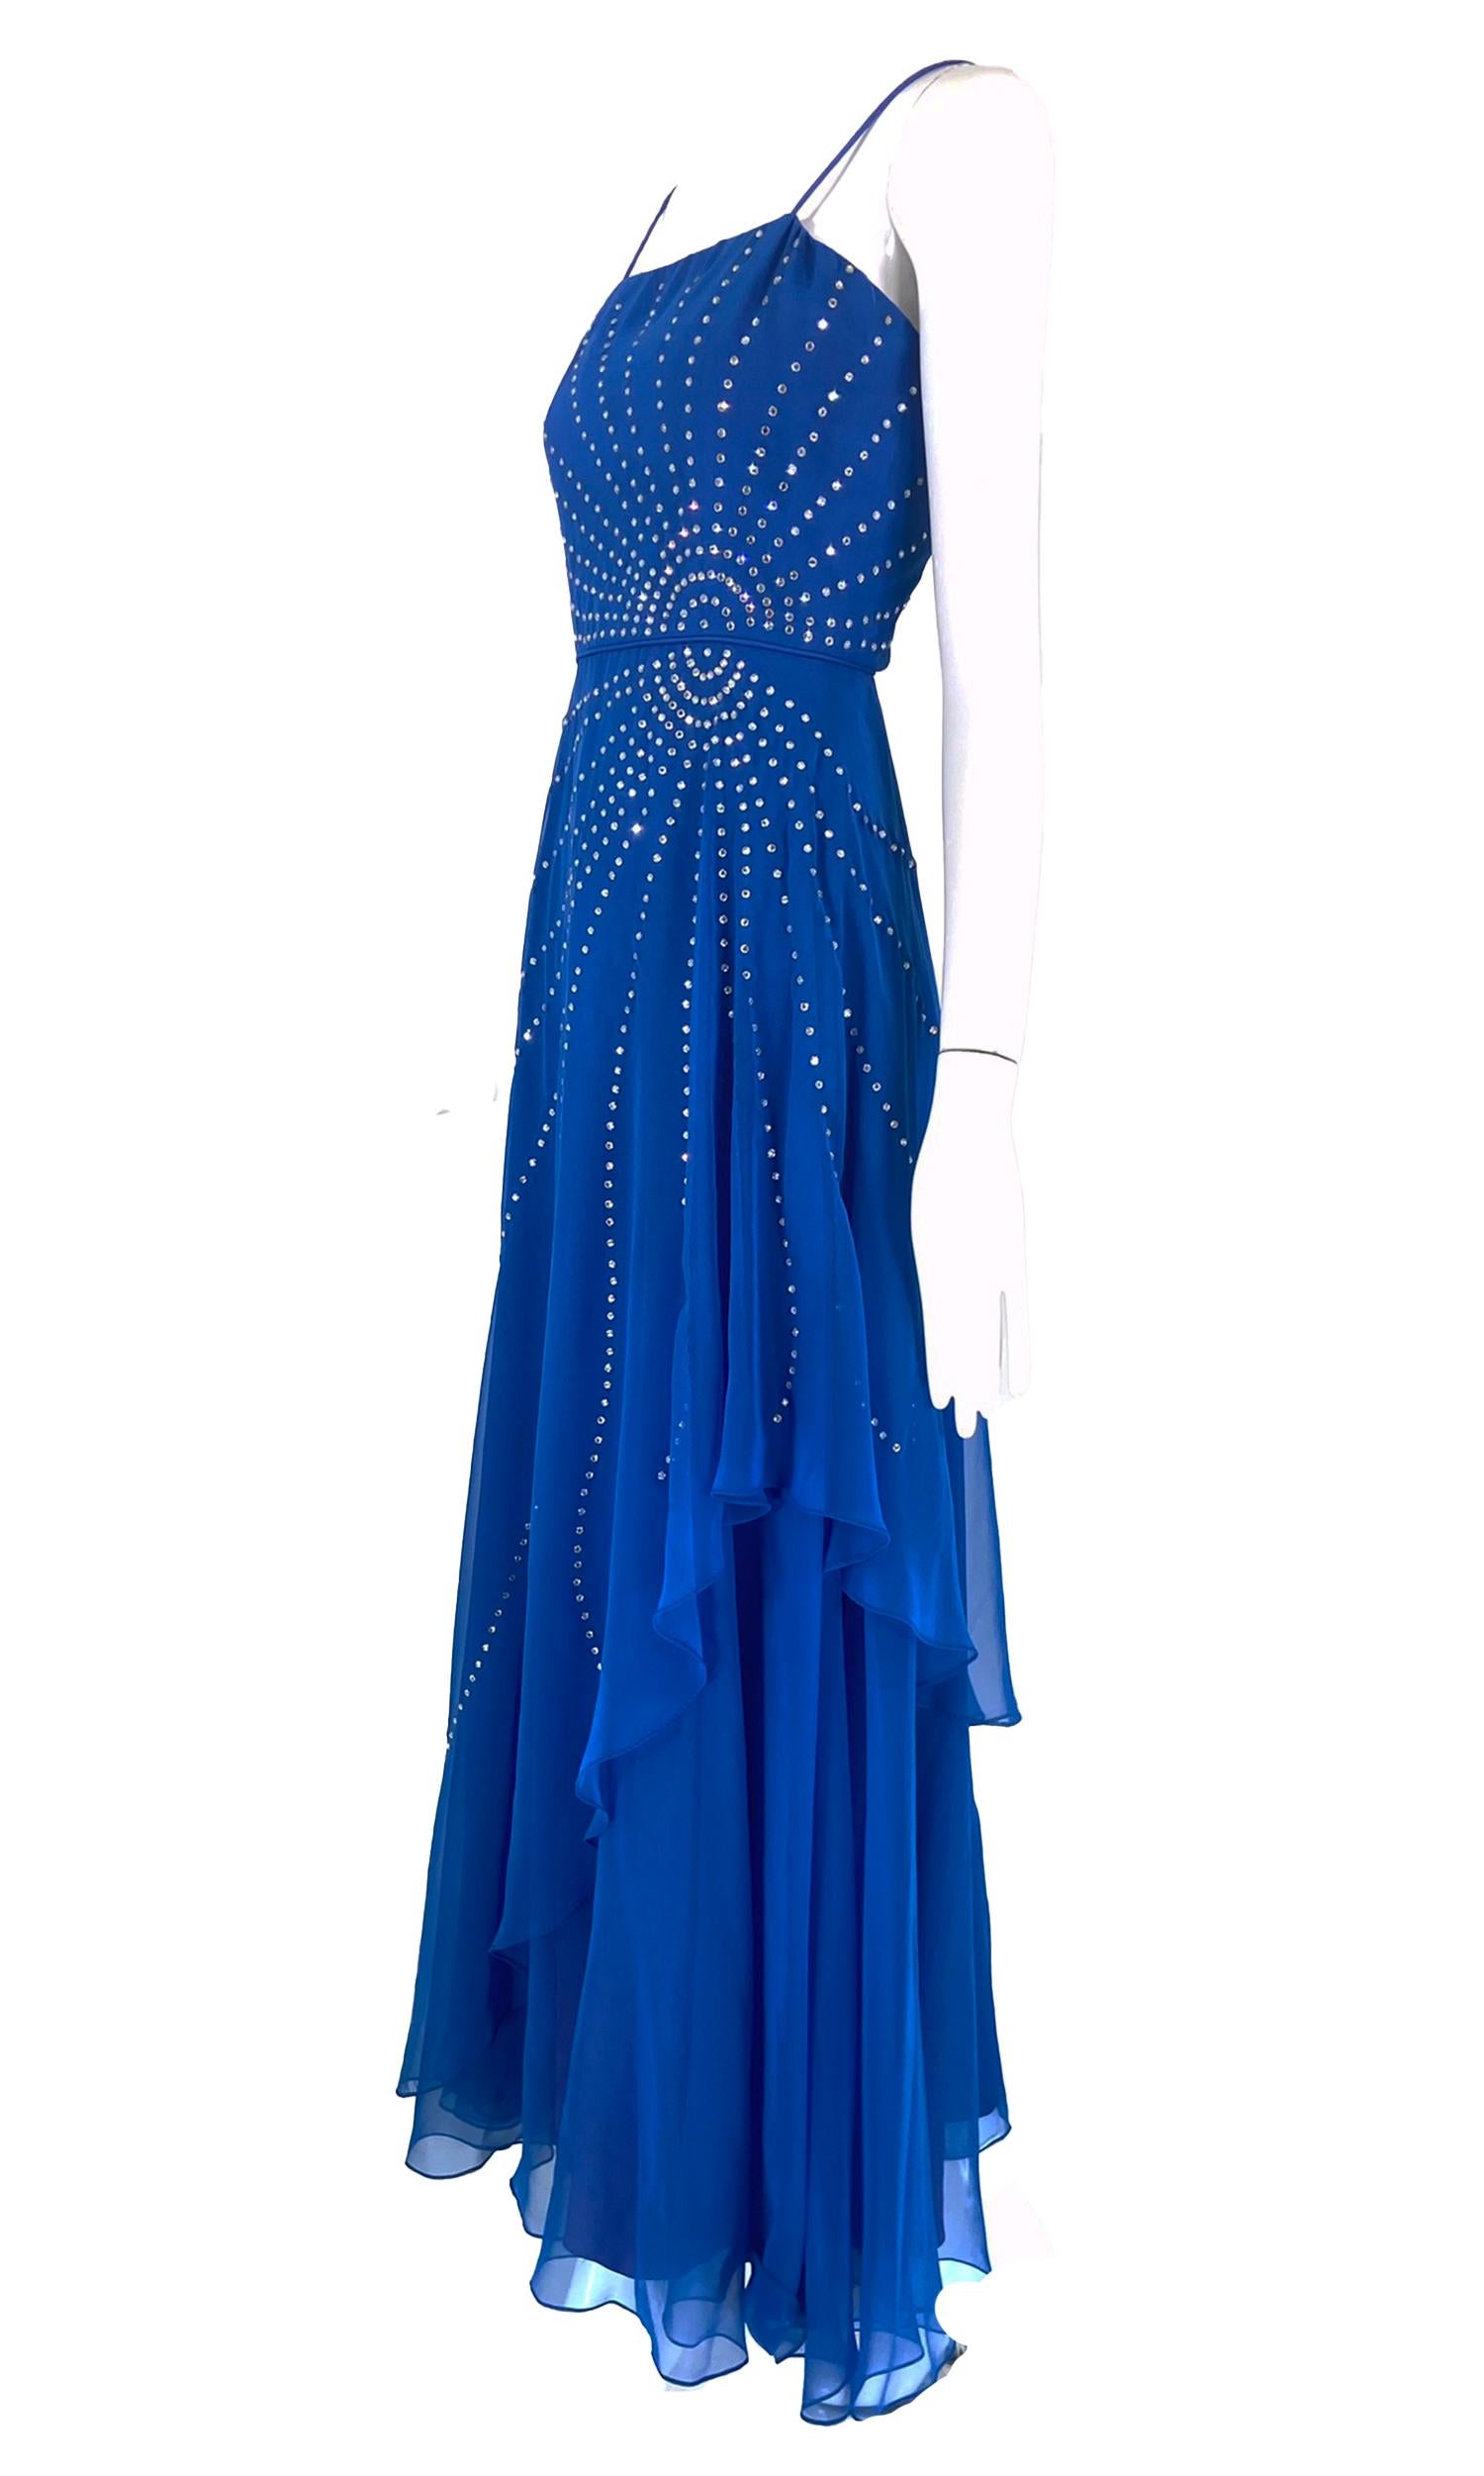 Rose Taft Couture Fashions royal blue chiffon rhinestone sunburst evening gown from the 1970s. Fitted bodice gown with spaghetti straps has a 1940s feel, prong set crystal rhinestones are set in a circular design with rays that sparkle across the